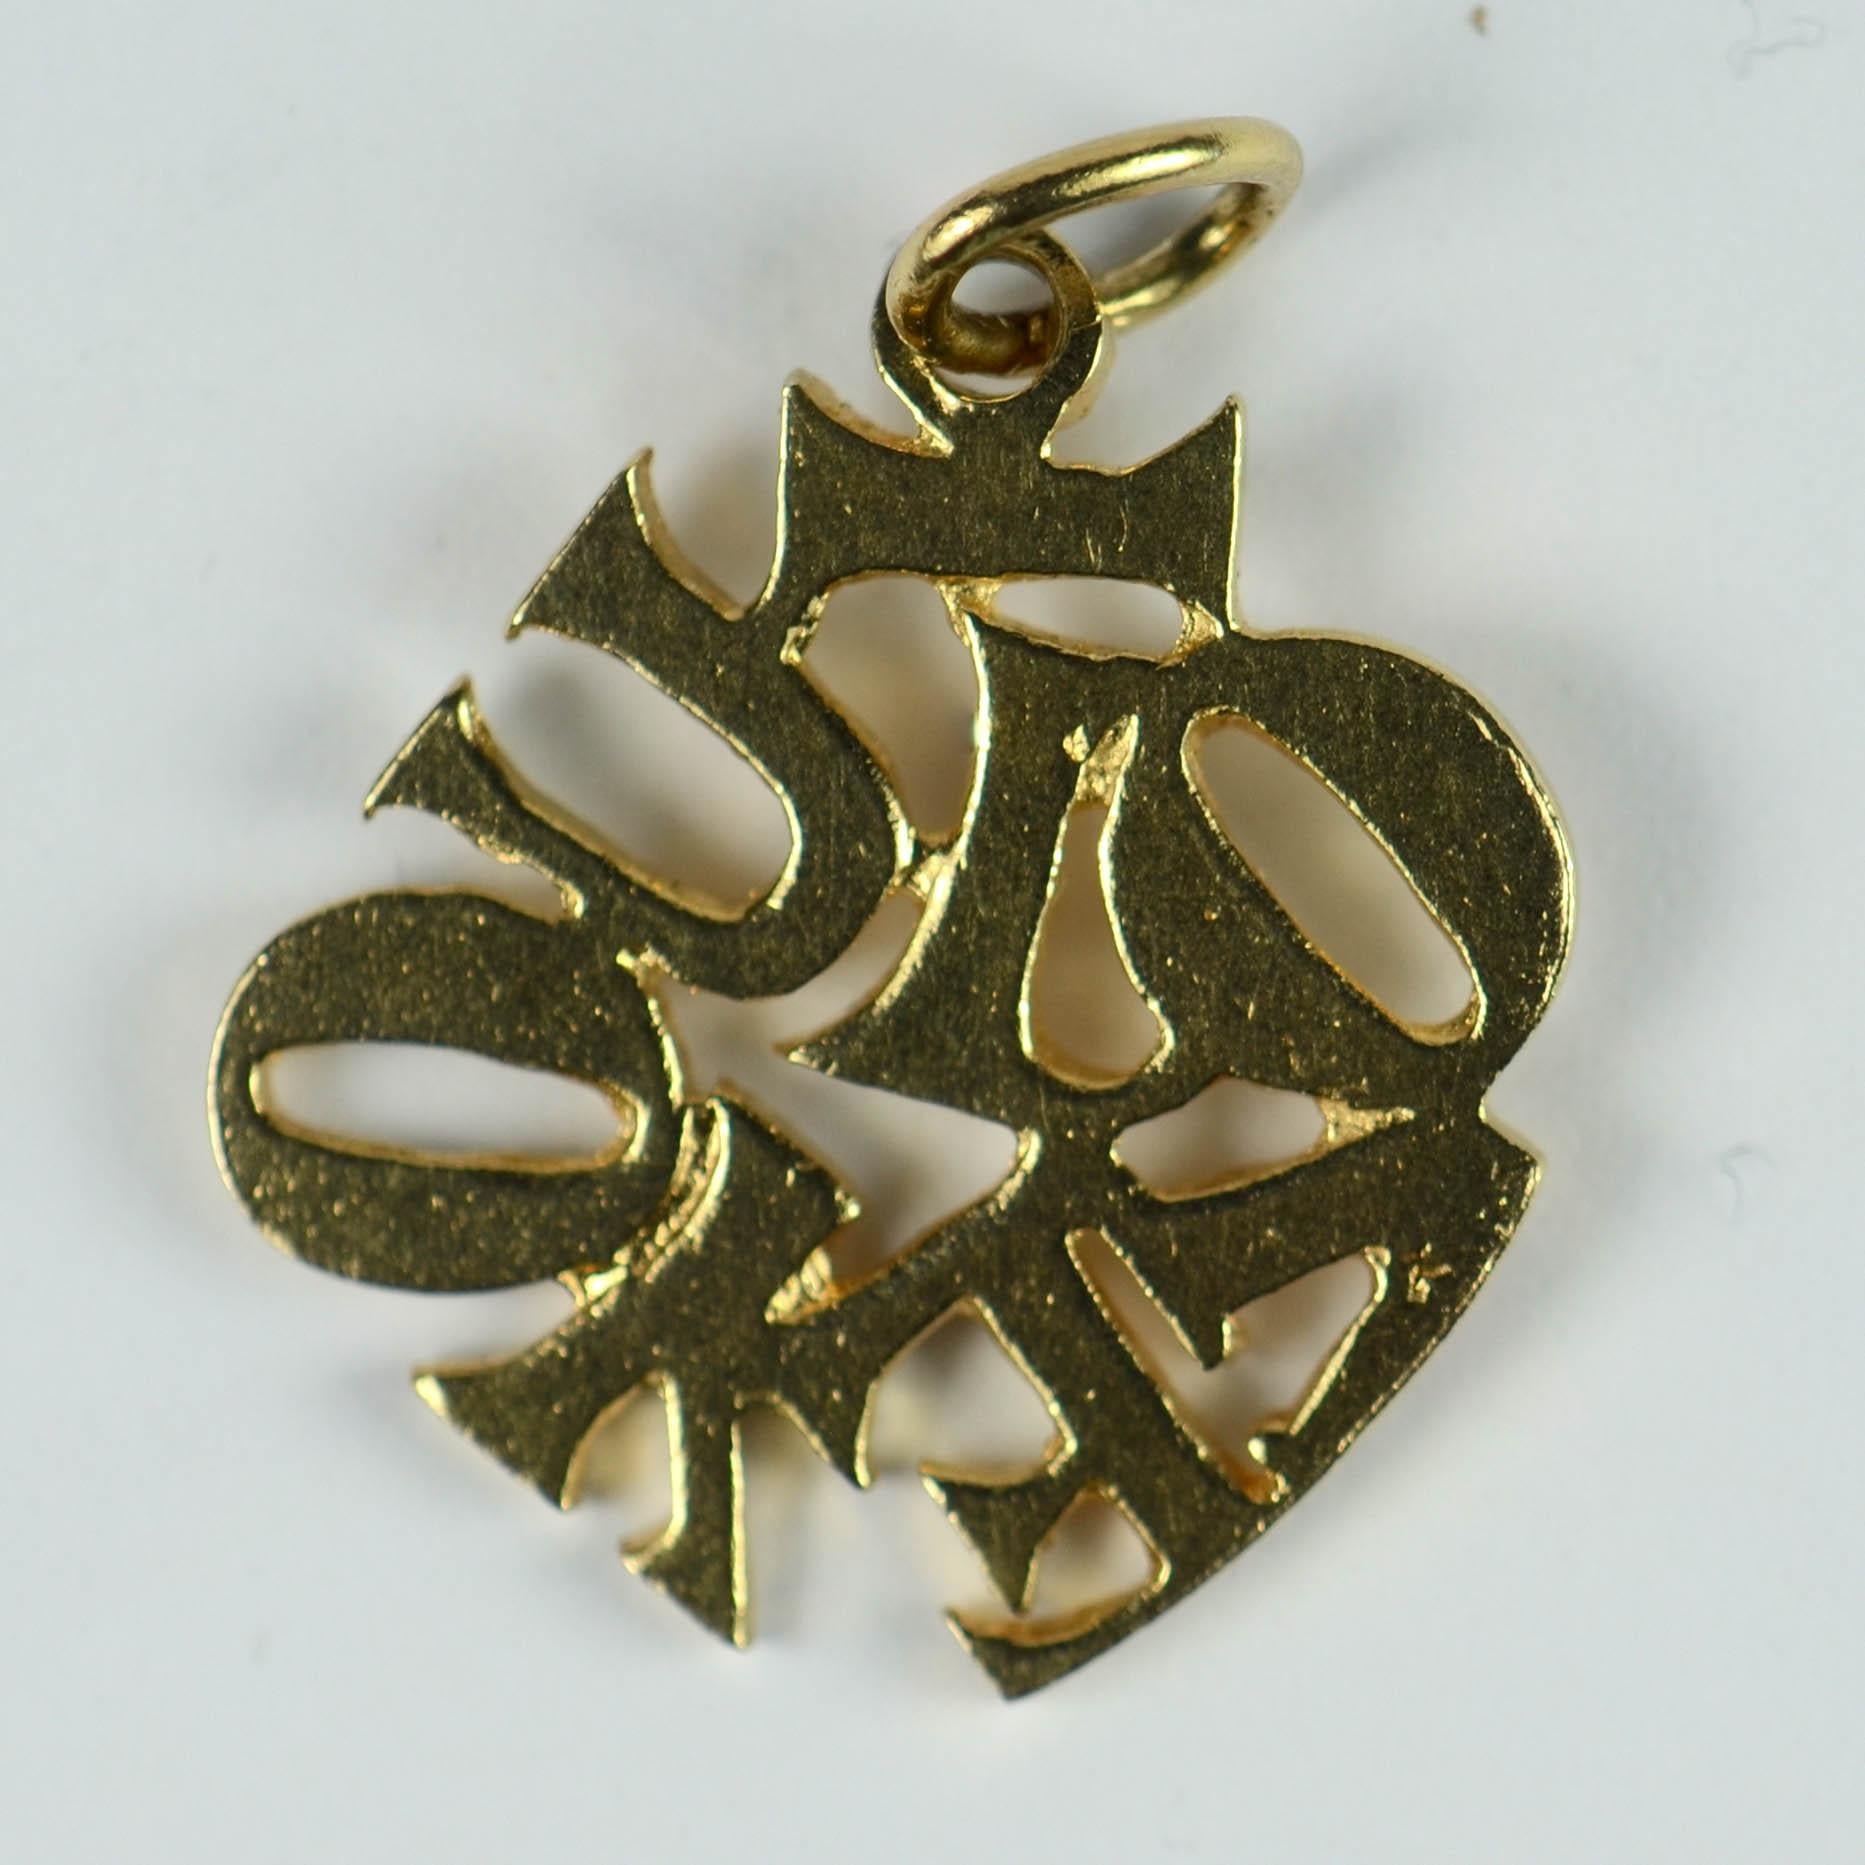 A 14 karat yellow gold charm pendant depicting the letters of the phrase 'I love you' in a puzzle arrangement.

Measurements: 2.5 x 2.1 x 0.1 cm
Weight: 2.76 grams